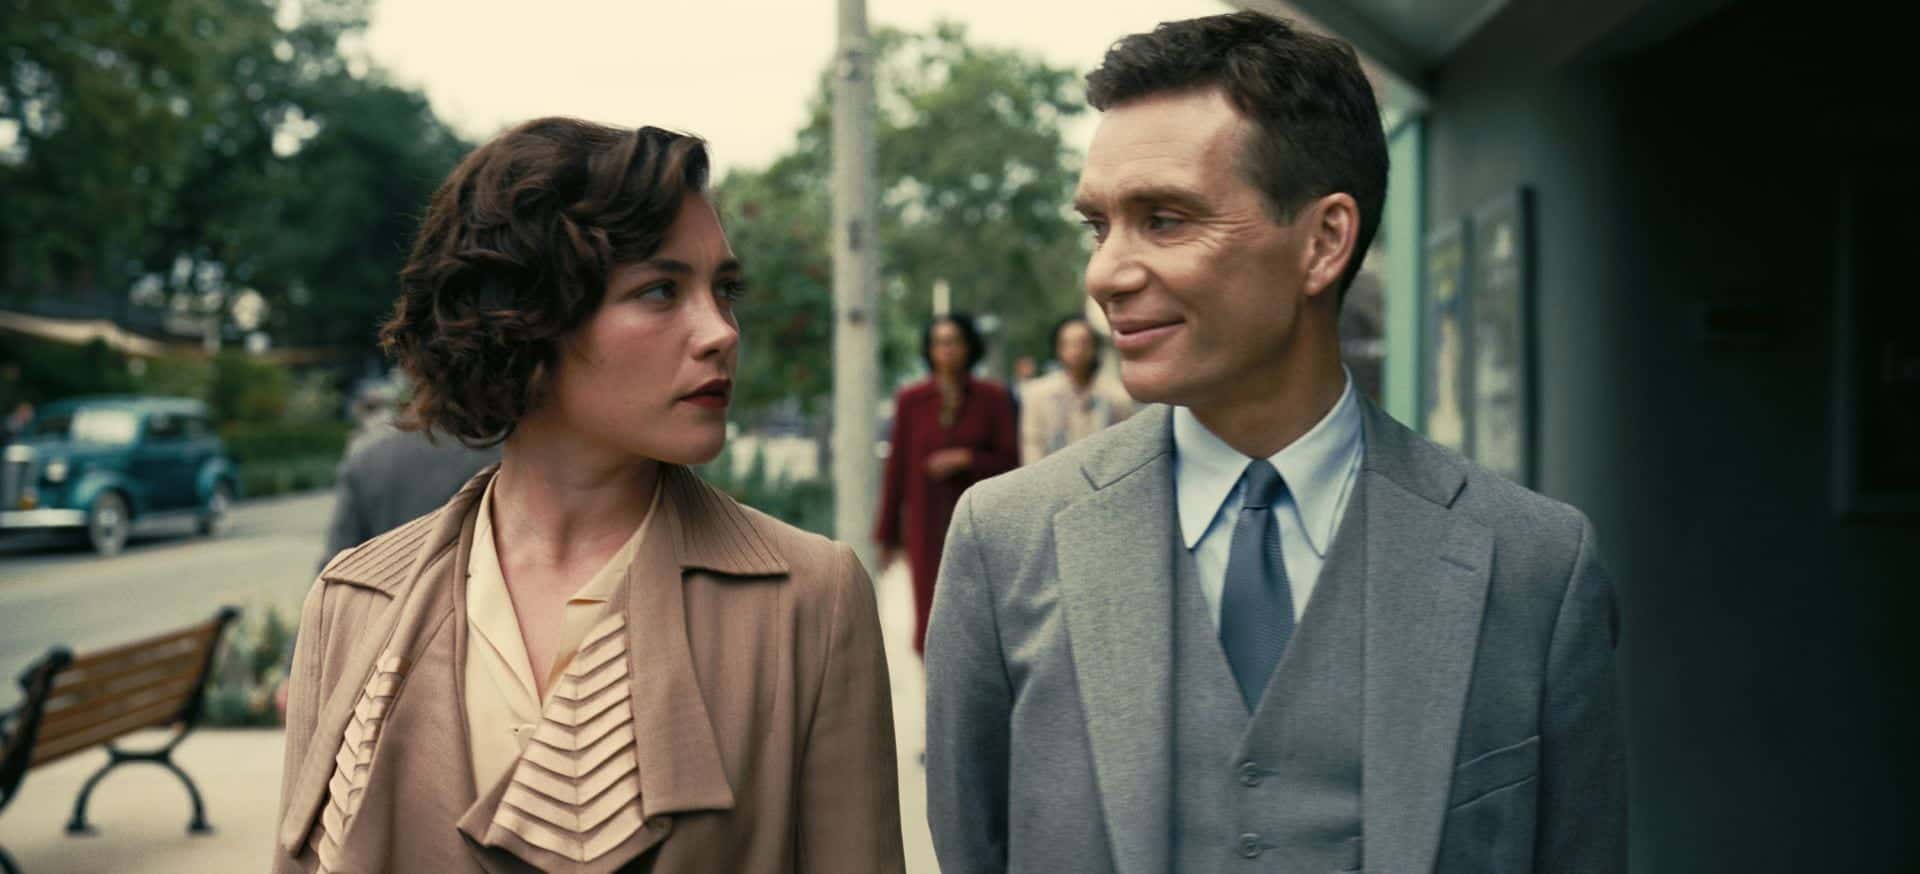 A couple faces each other as they walk down the street in this image from Universal Pictures.